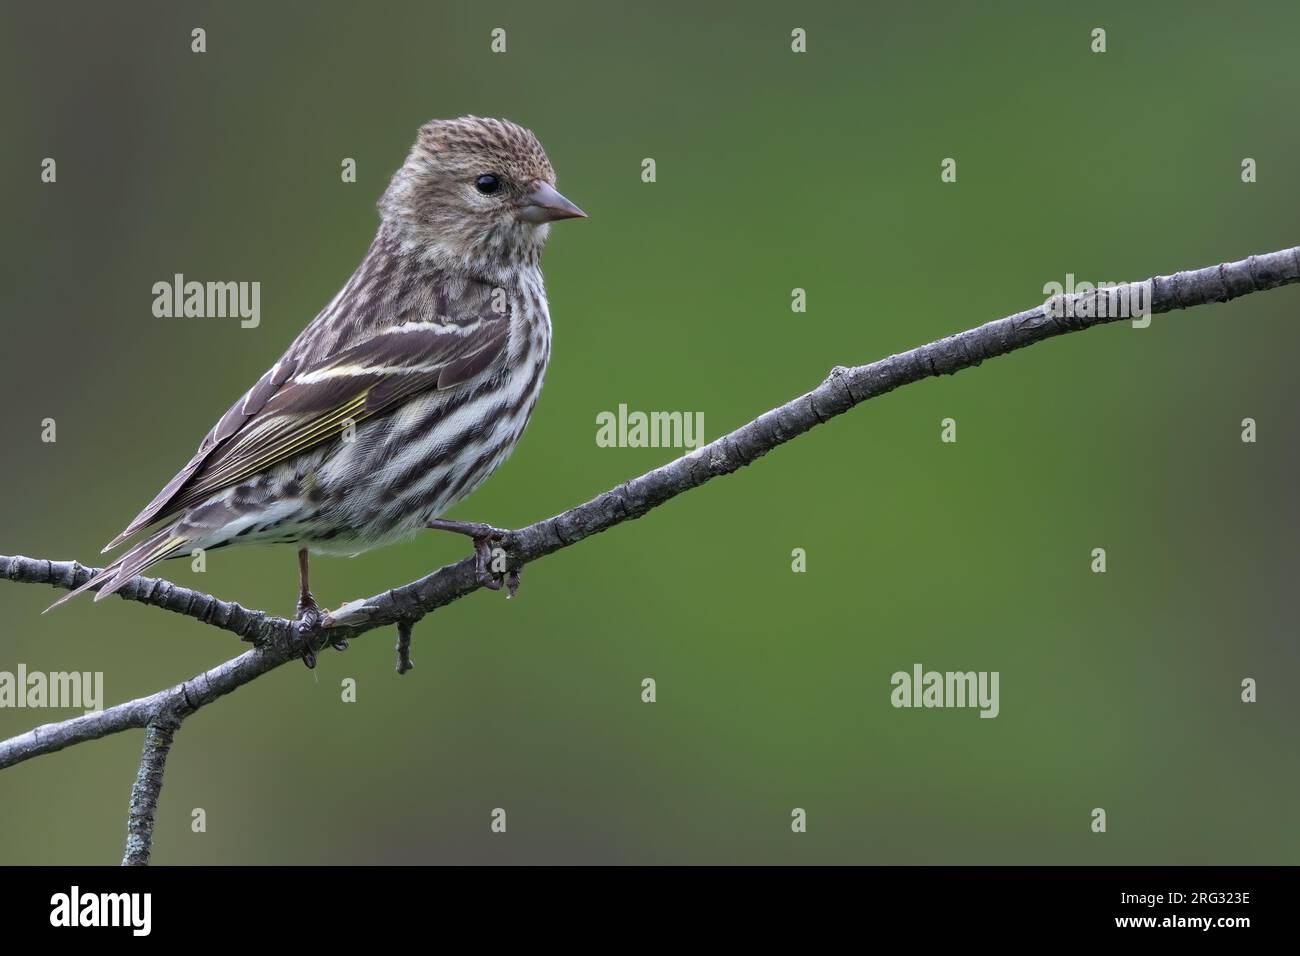 Pine Siskin (Spinus pinus) perched on a branch Stock Photo